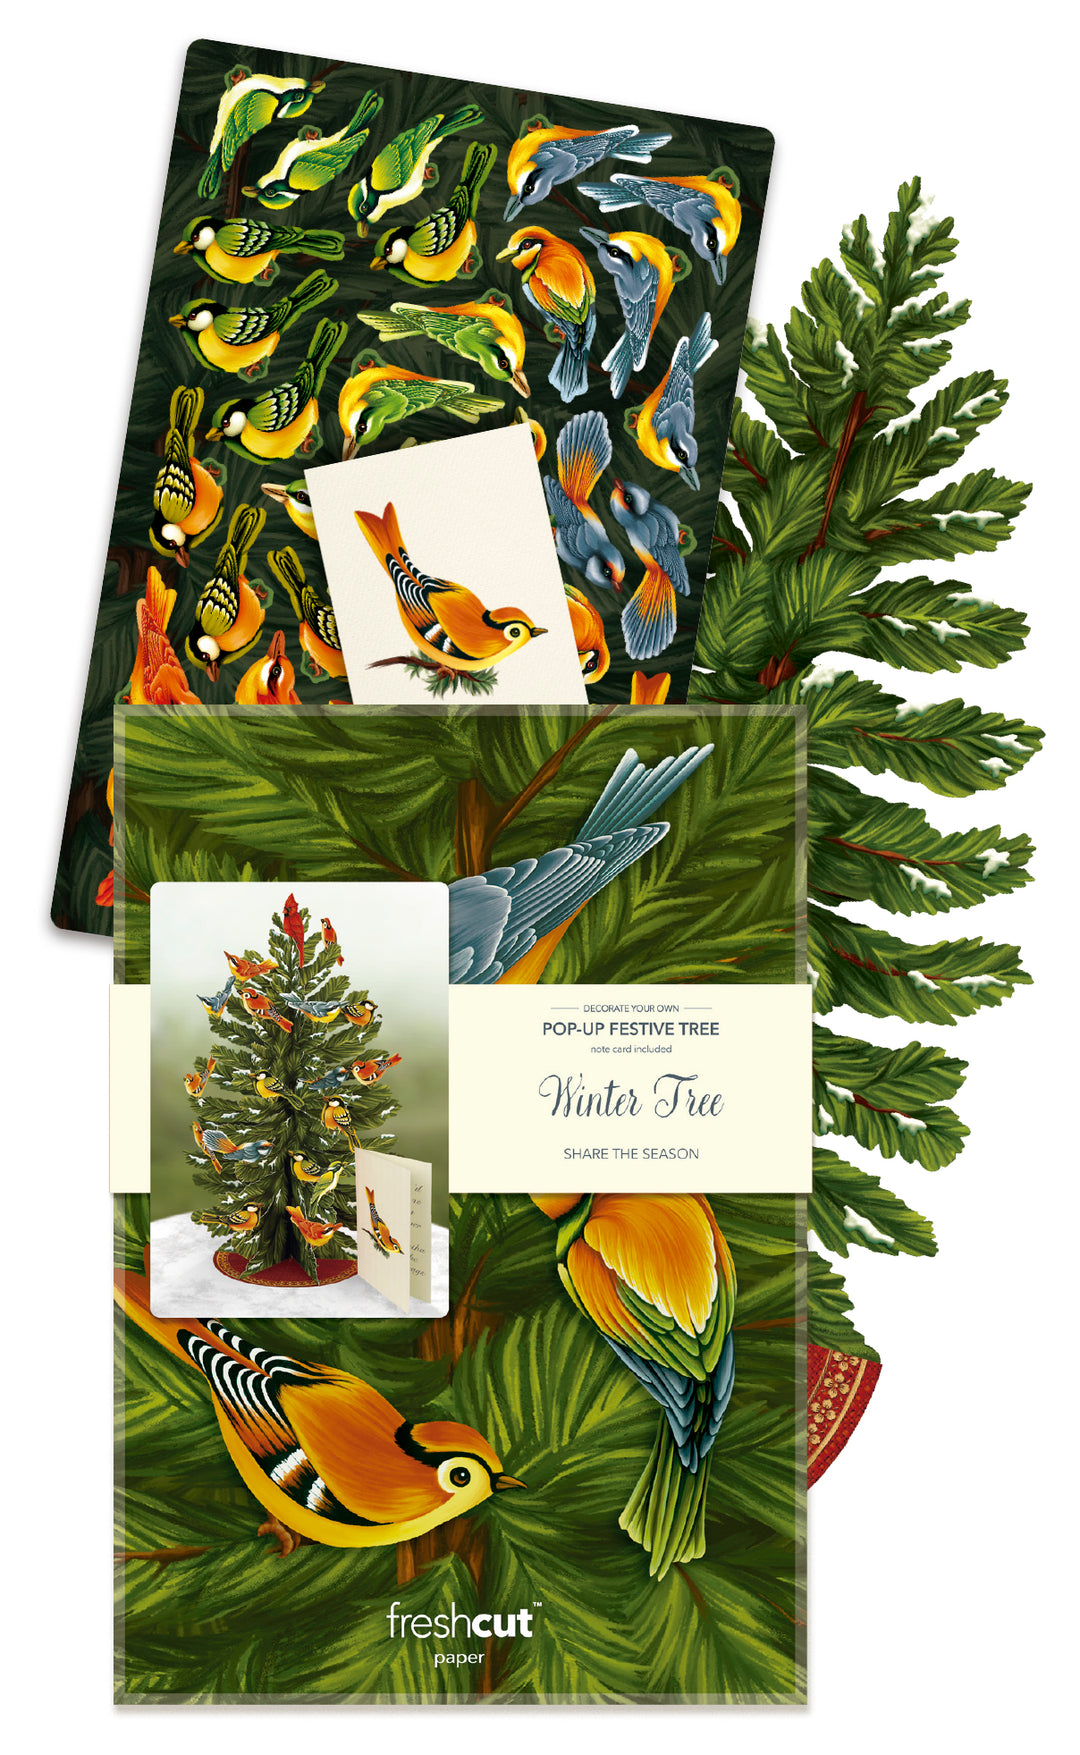 FreshCut Paper's Winter includes over 36 bird decorations for your tree. More than a keepsake, our trees will last forever!